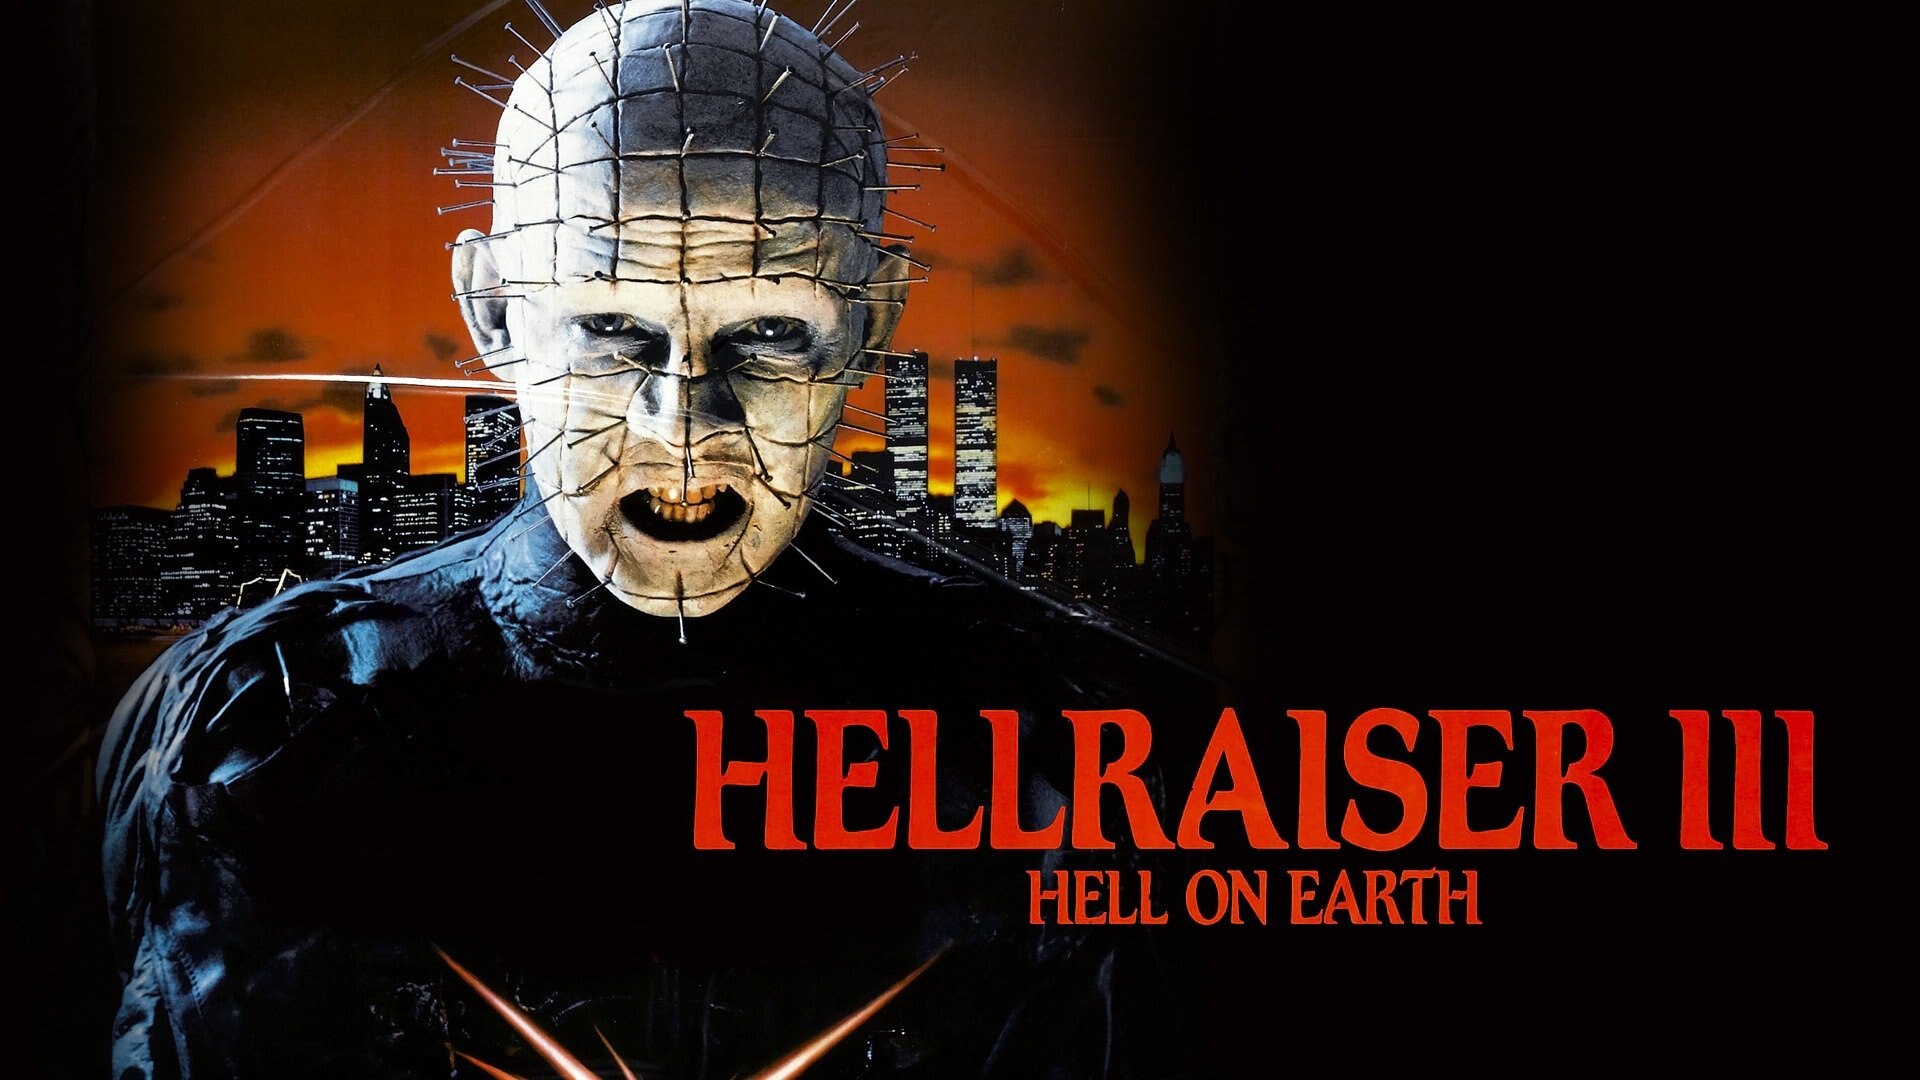 32-facts-about-the-movie-hellraiser-iii-hell-on-earth